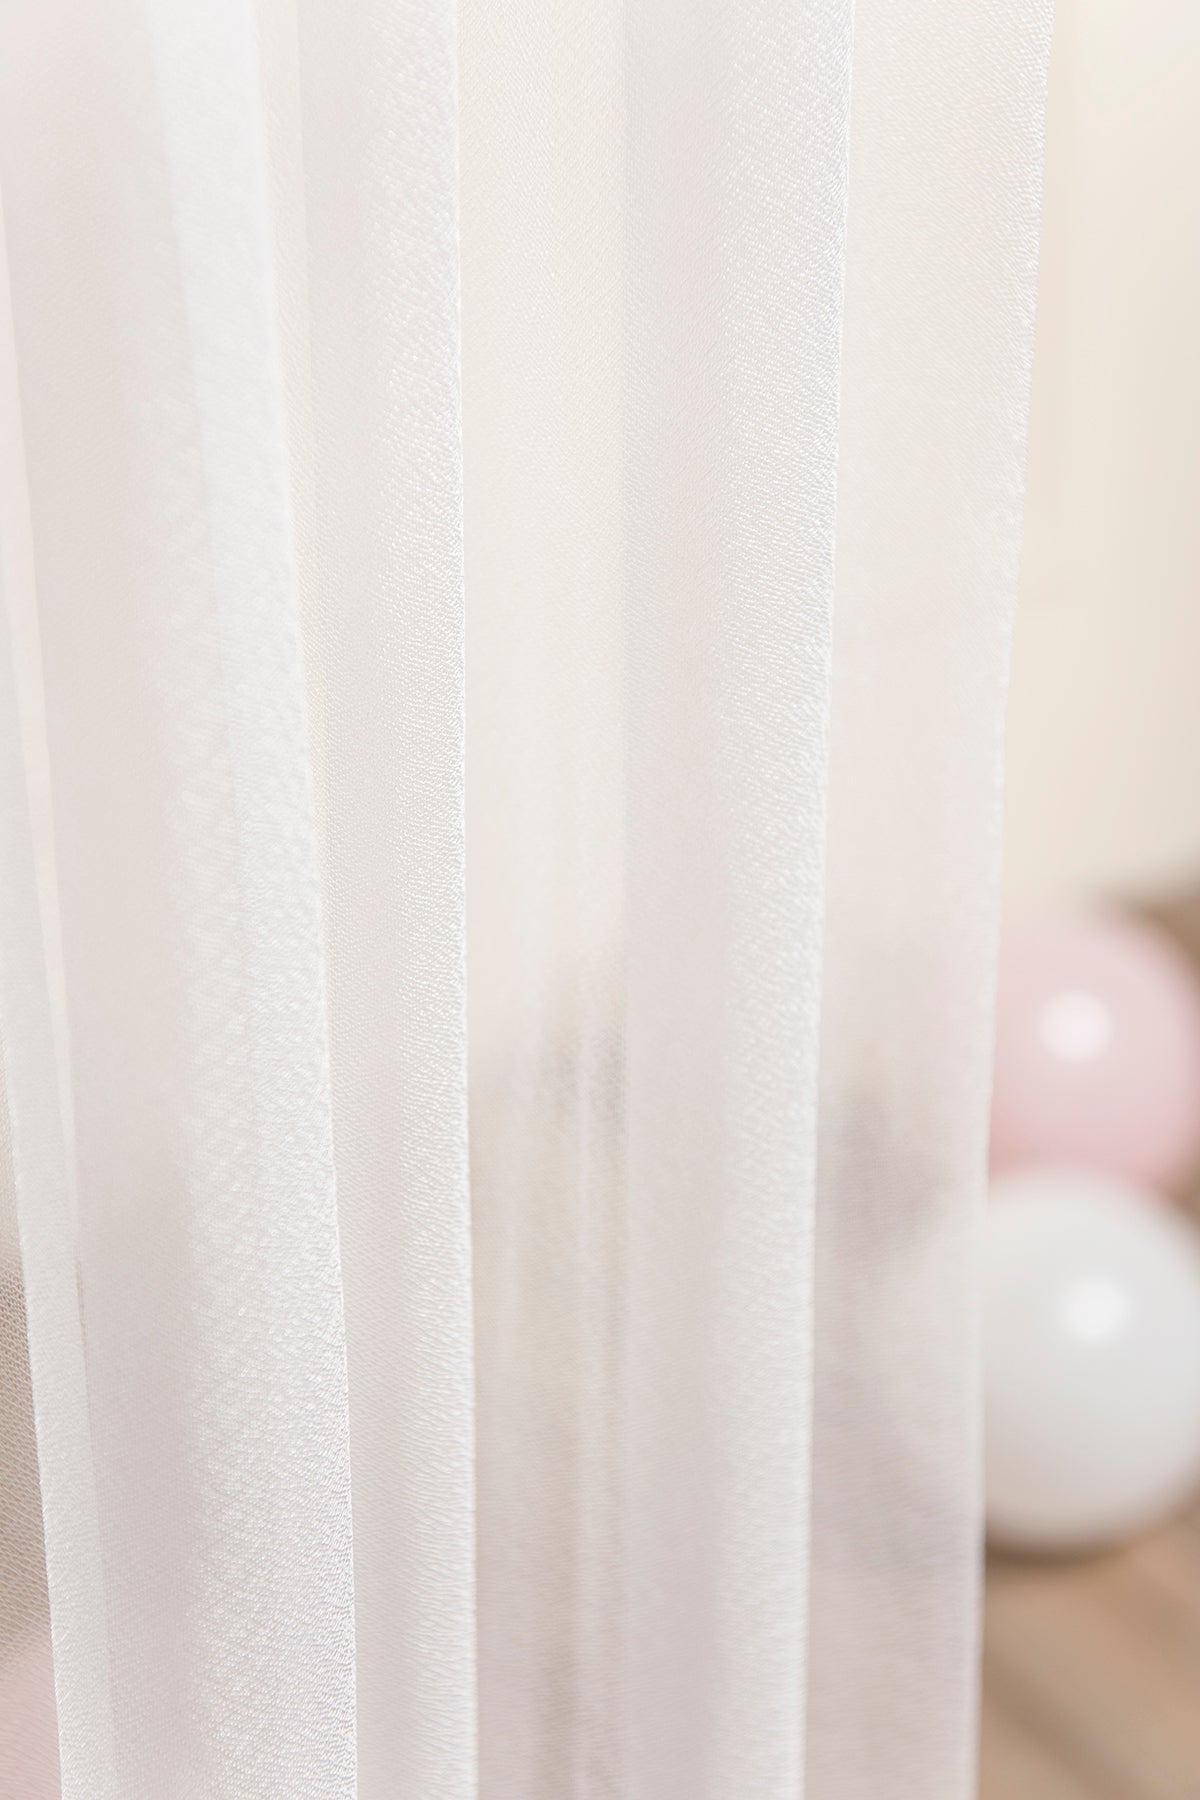 White Sheer Wedding Backdrop Curtains 10 Ft x 10 Ft - Ling's moment